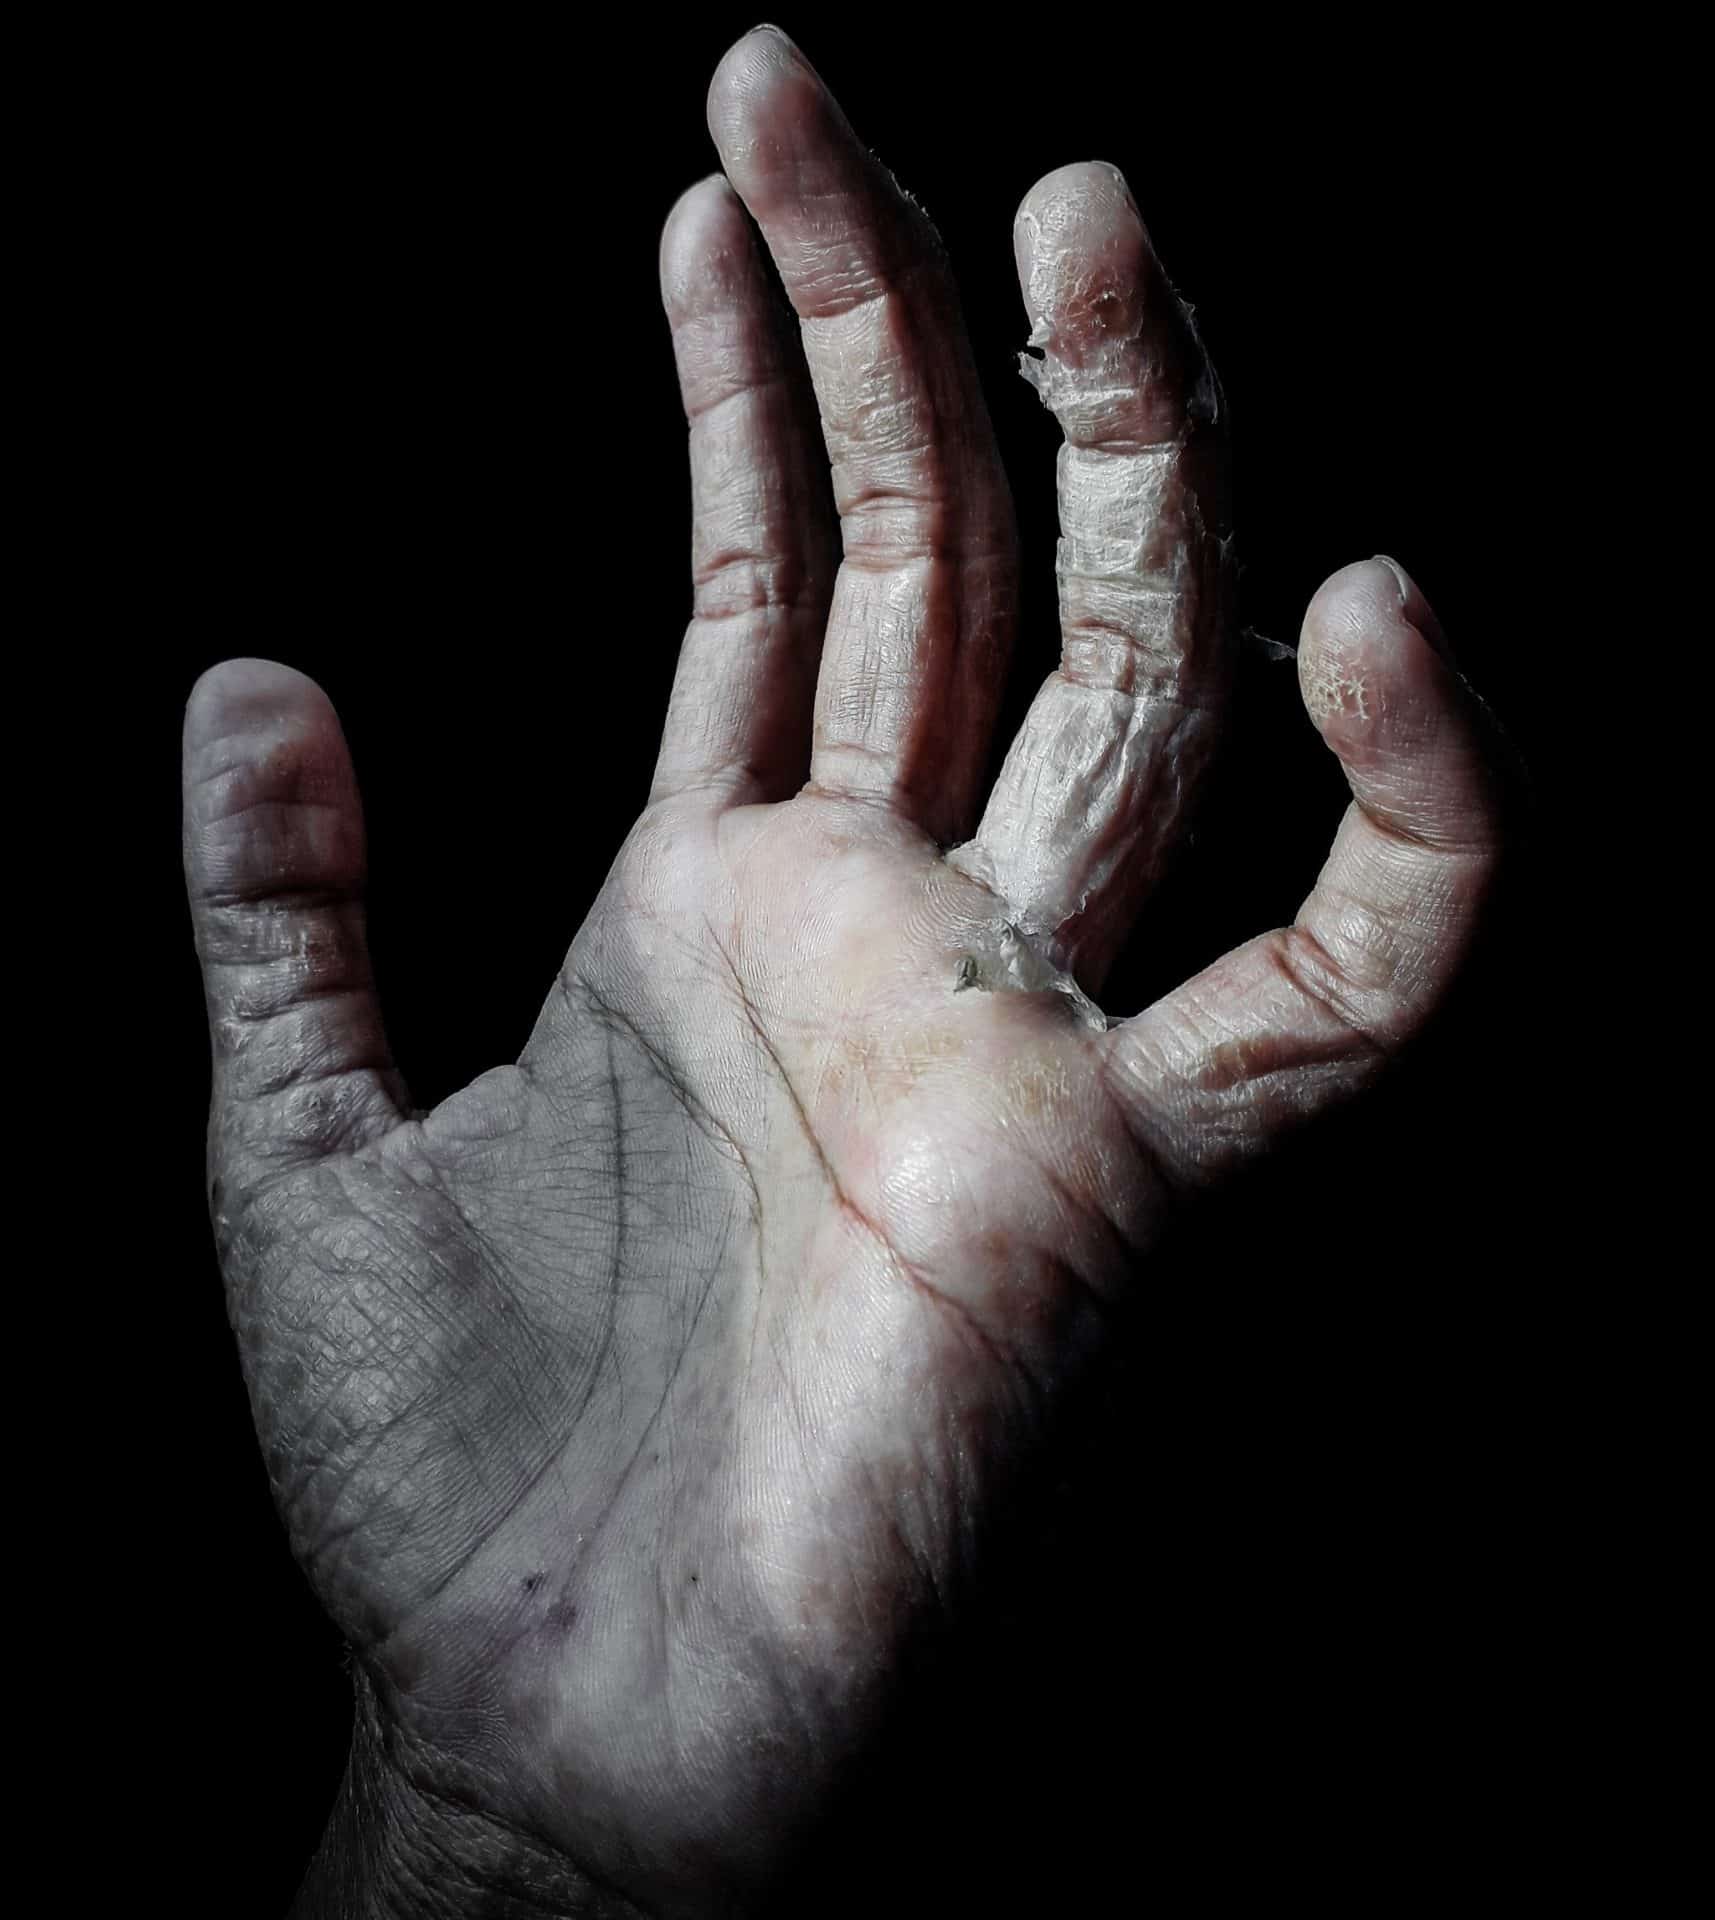 A blistered hand is held up against a black background, symbolizing the solidarity that will be required to face the environment crisis